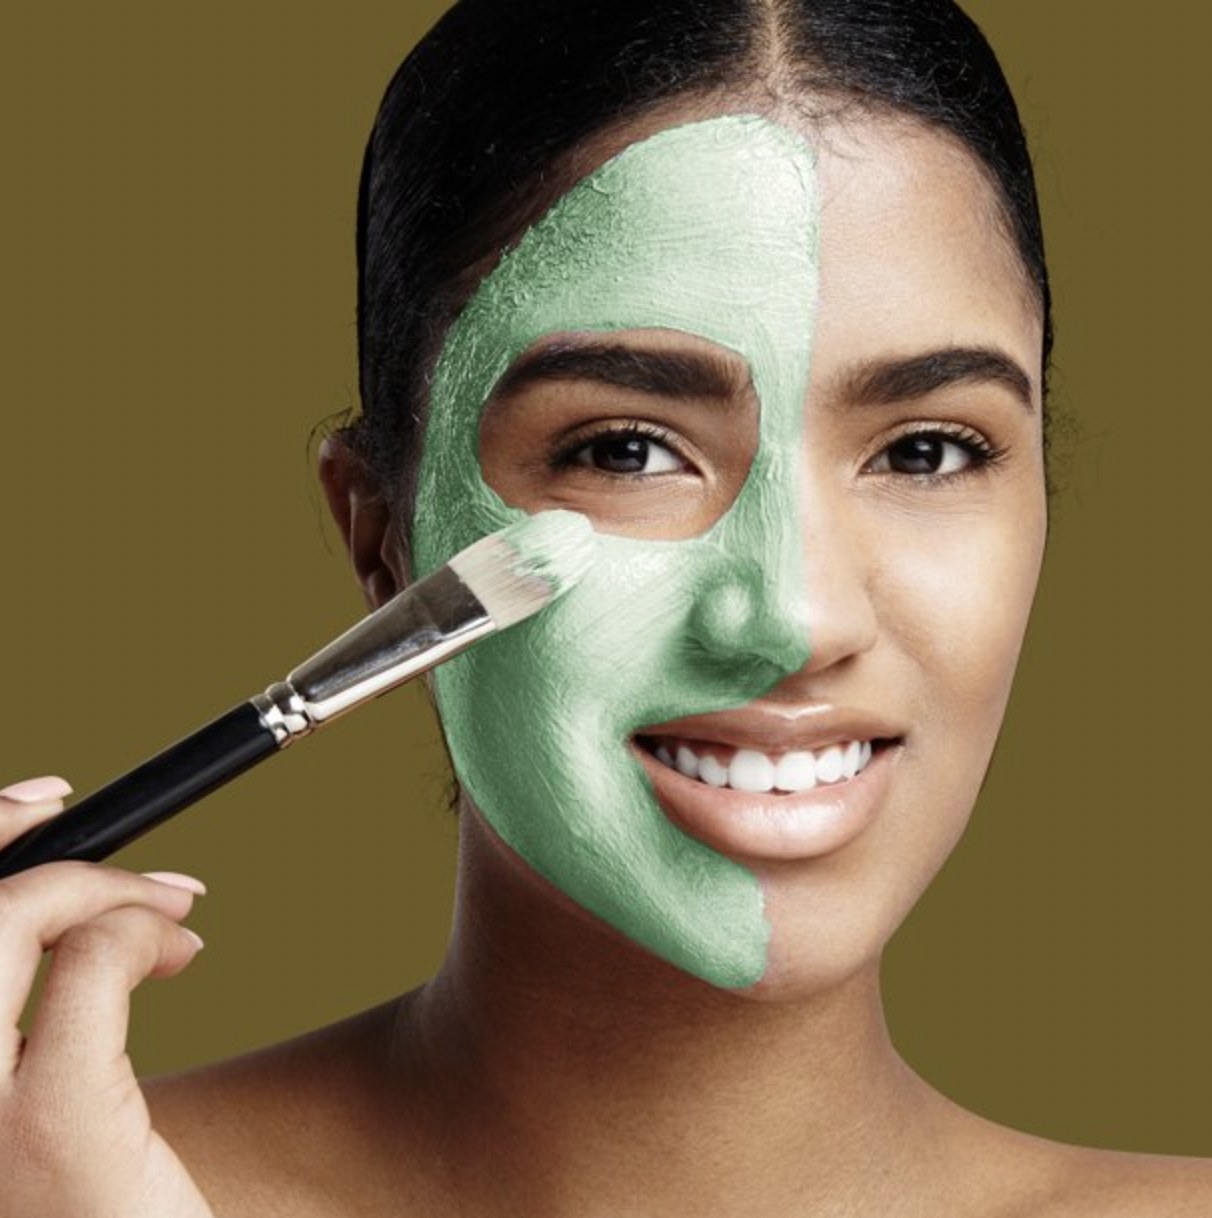 A person applying a green face mask to half of their face